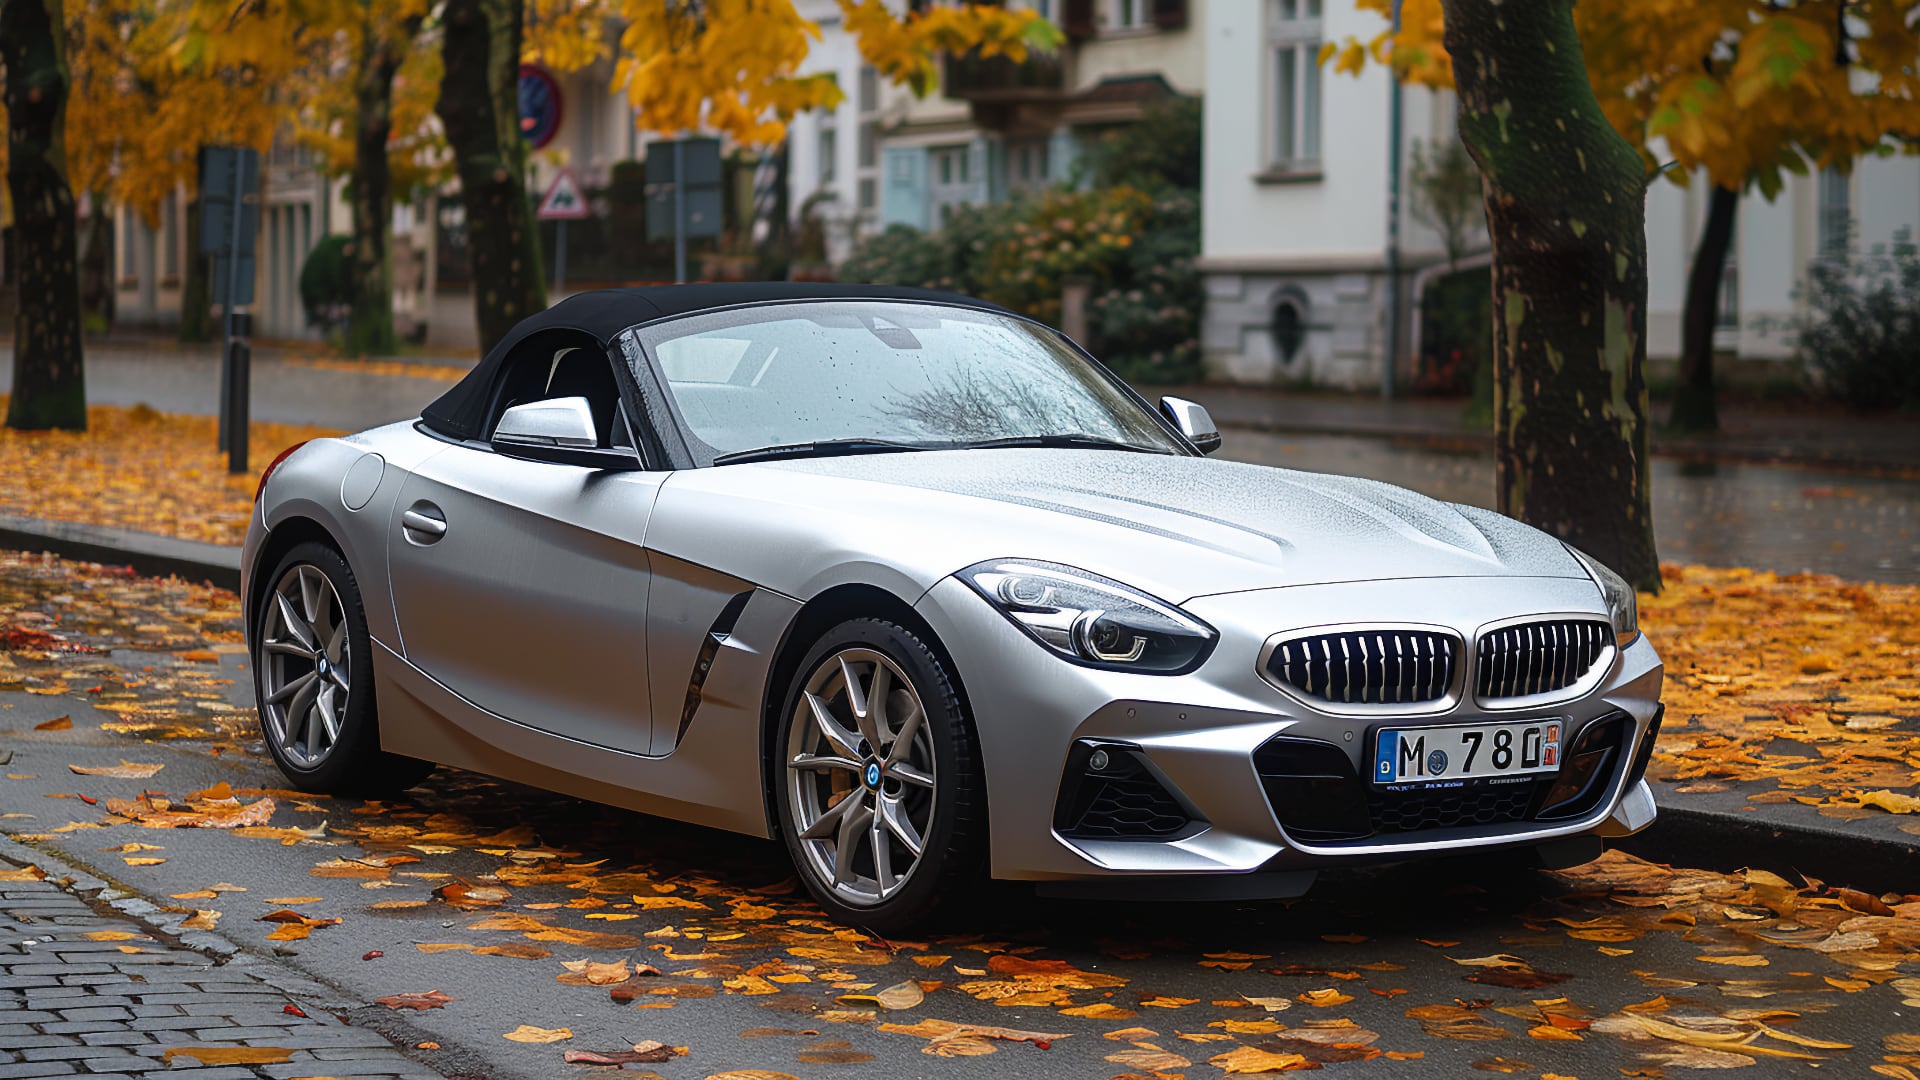 The BMW Z4 roadster is parked on the street.